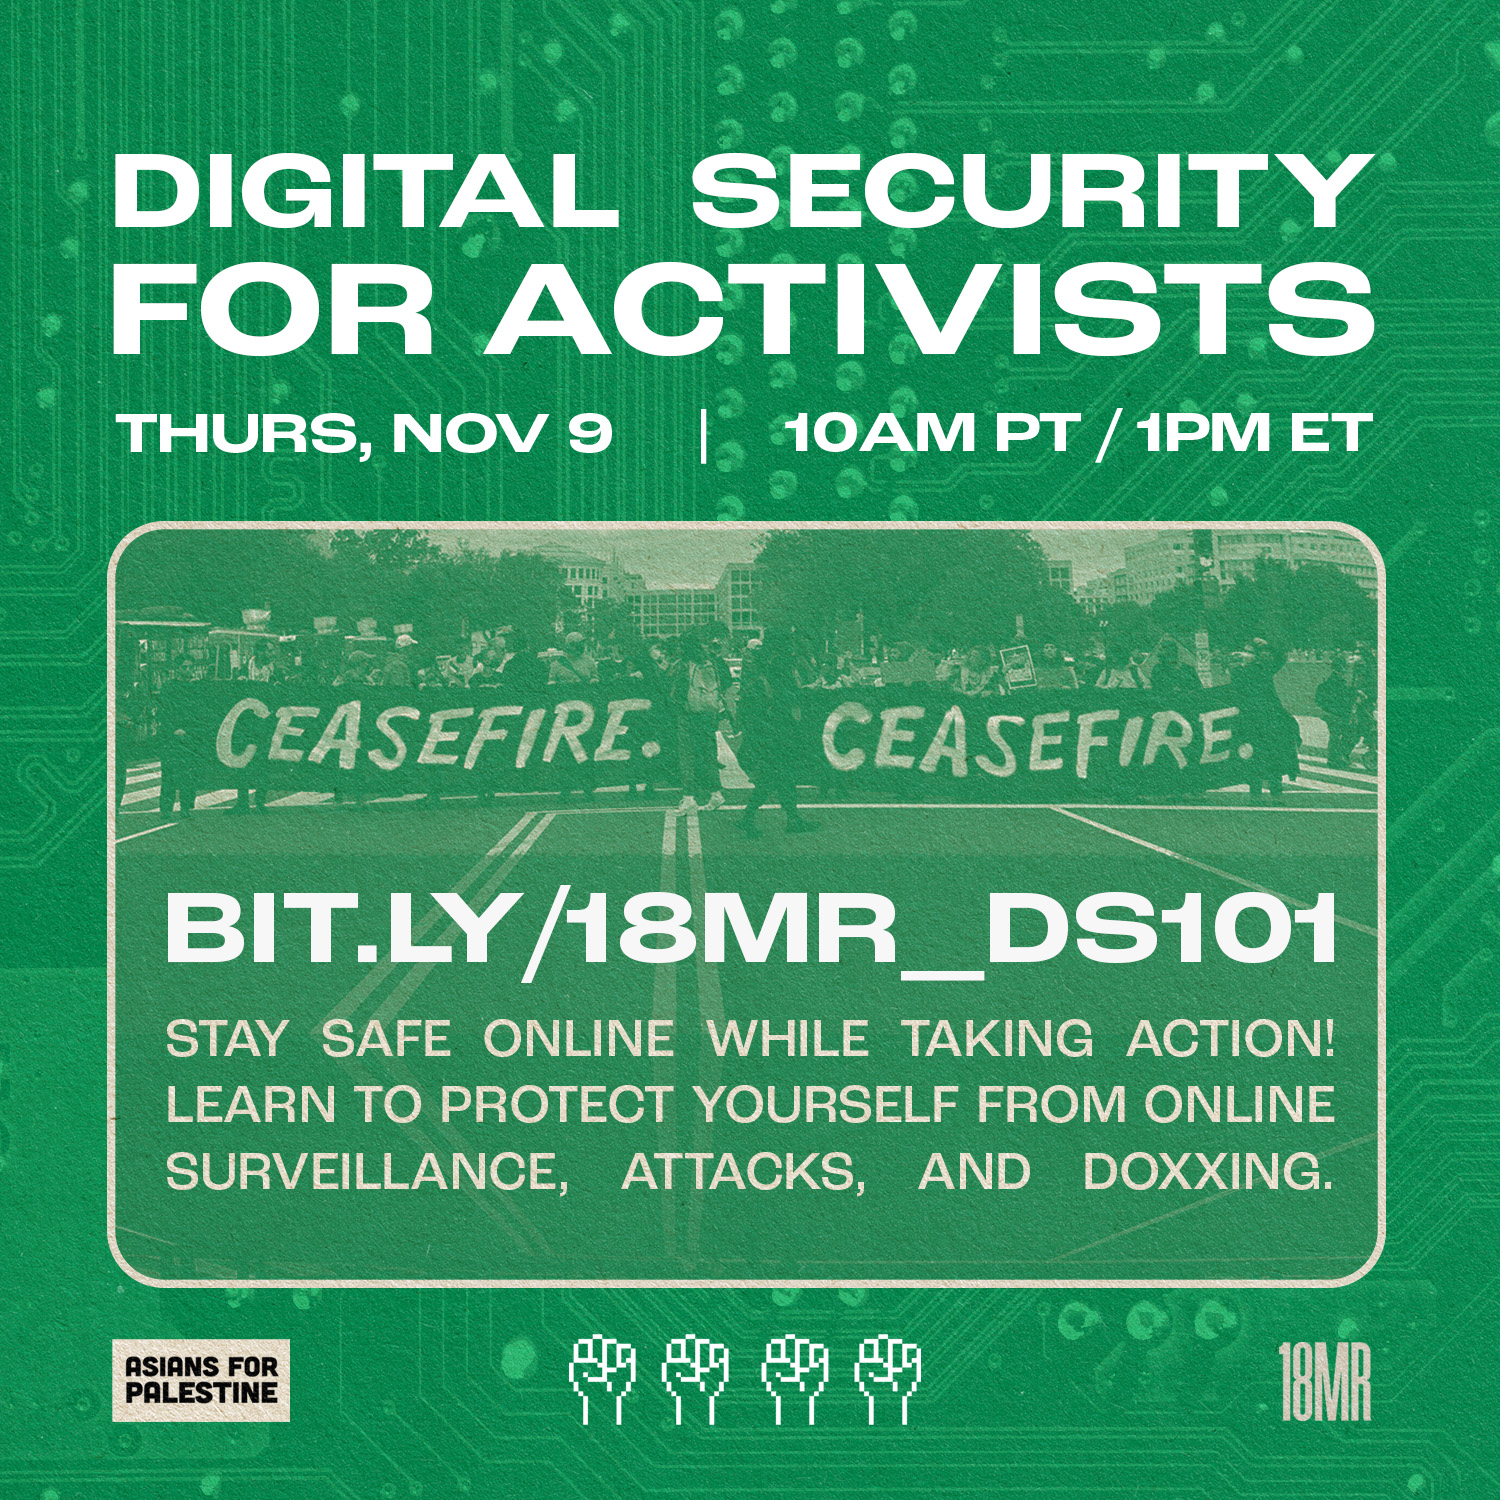 Digital Security for Activists Training